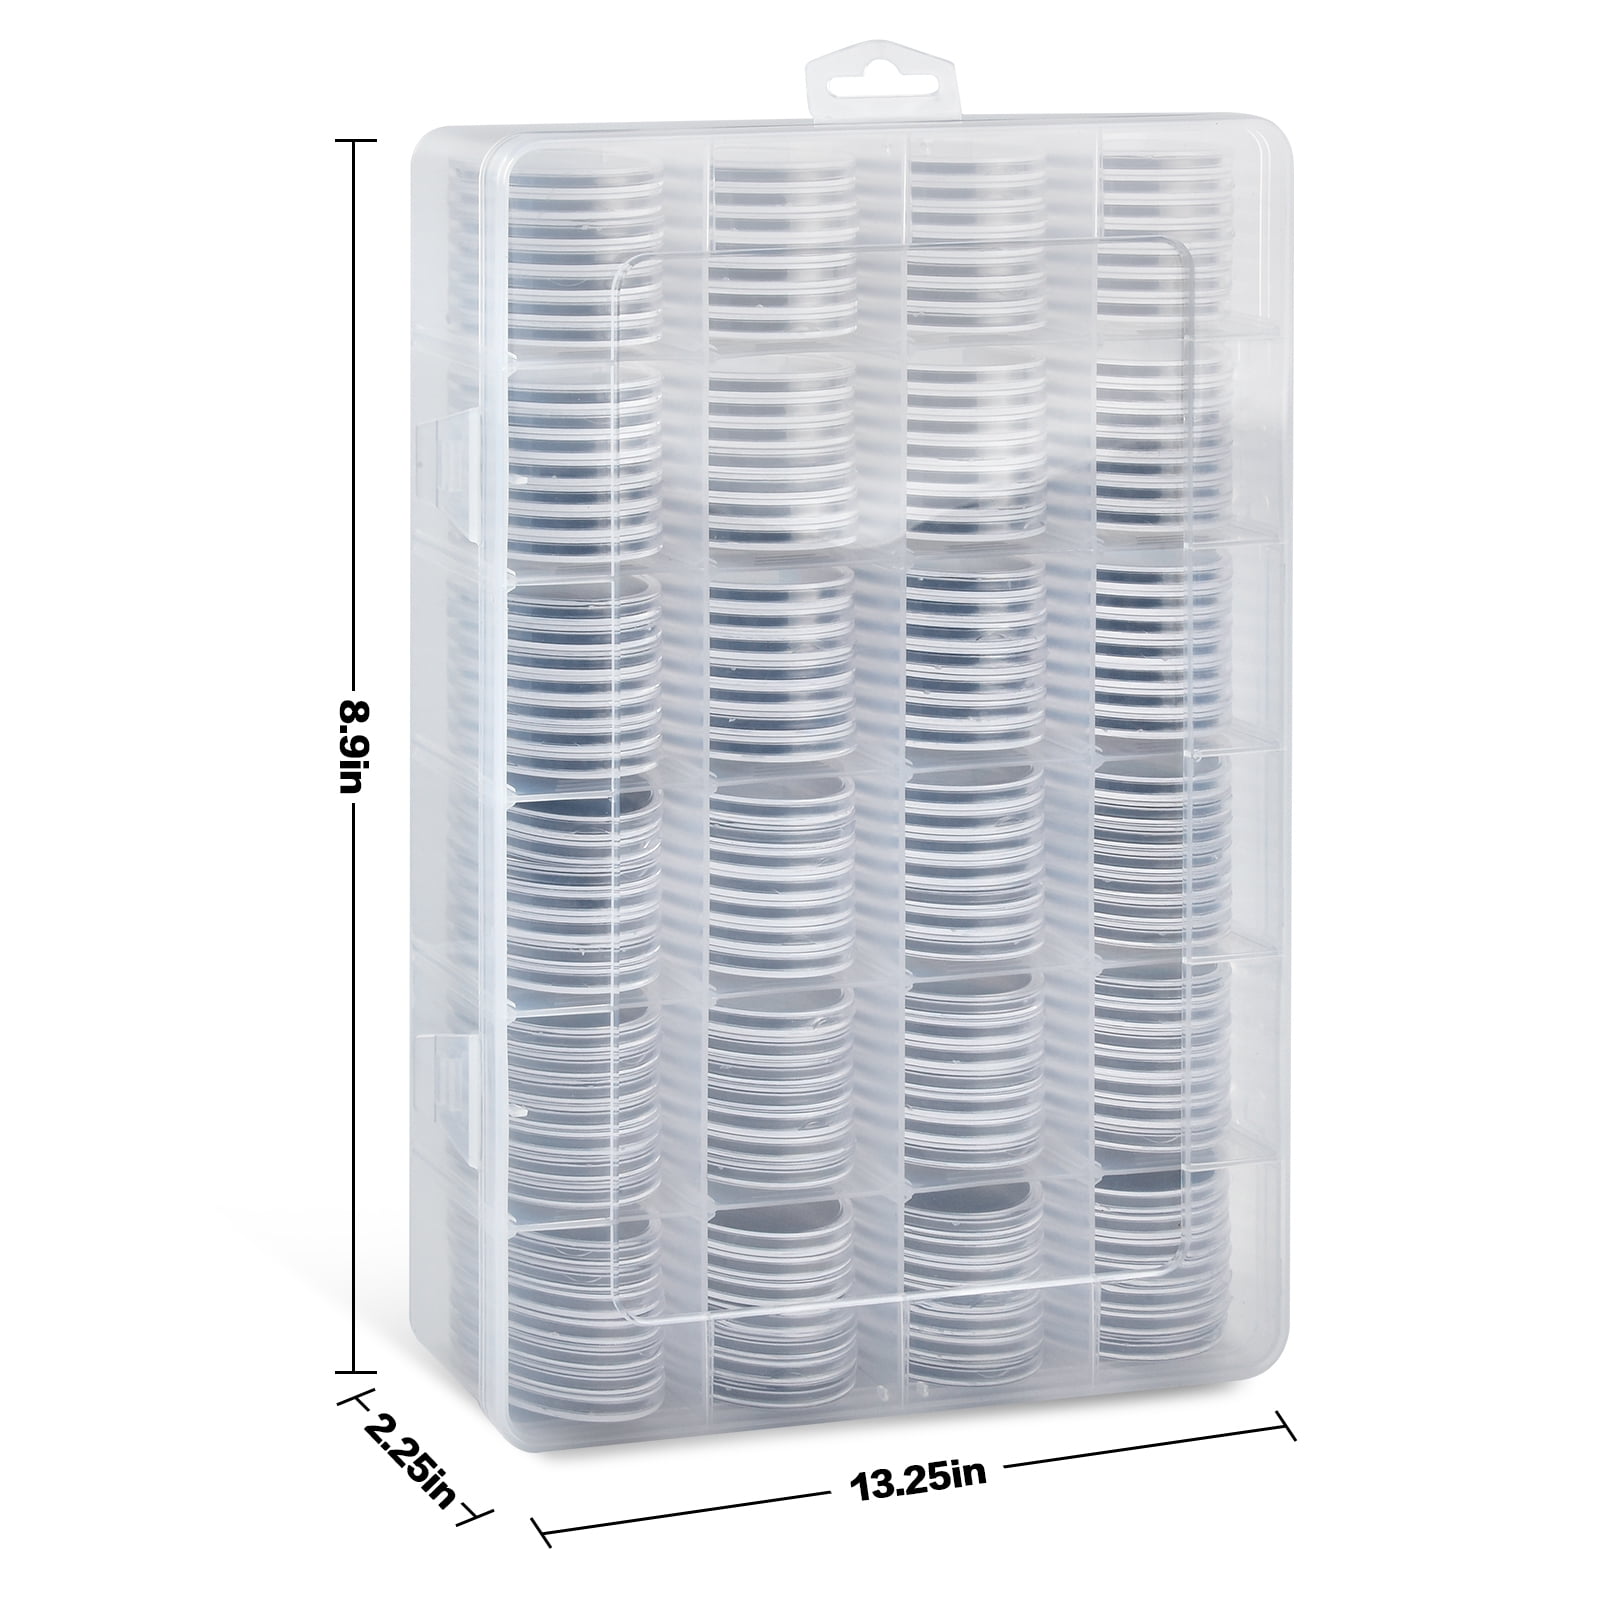  FULLCASE Coin Collection Supplies Holders for Collectors, 84  Pieces 46mm Coins Capsules with Foam Gasket and Plastic Storage Organizer  Box, 6 Sizes (20/25/27/30/38/46mm) Collecting Case, Box only : Office  Products